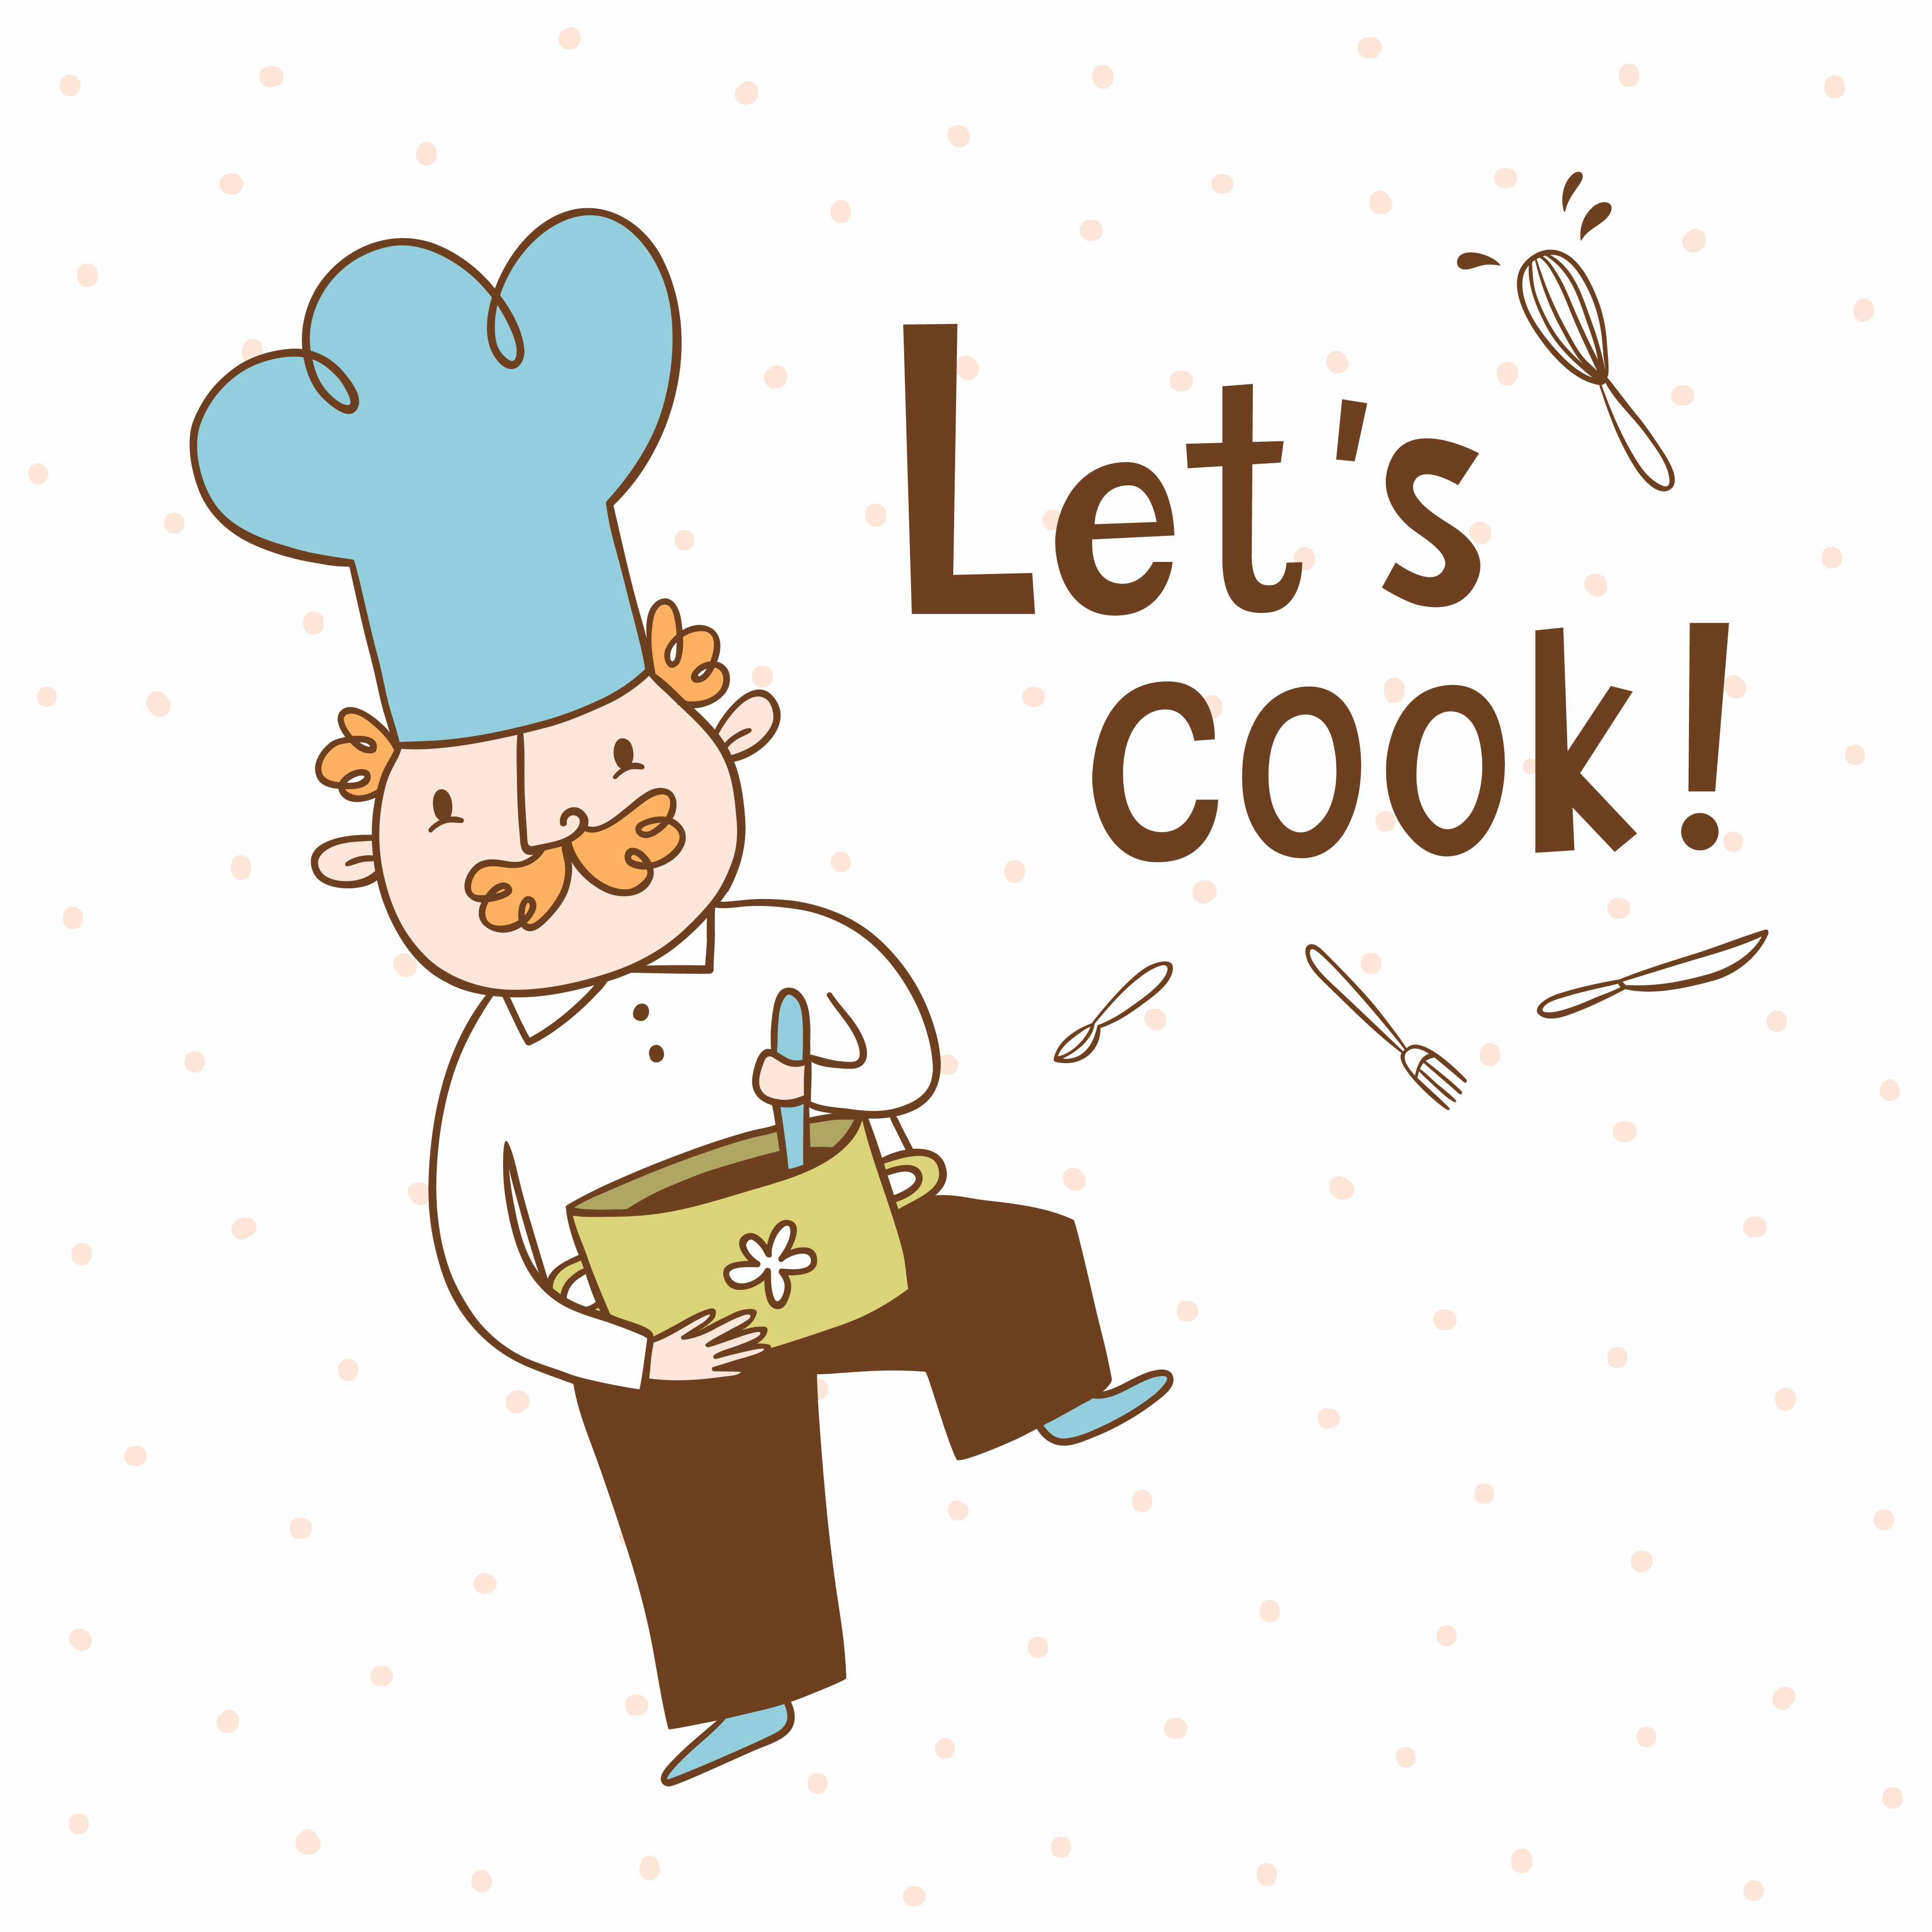 Let's cook. Vector illustration of a cook Photoshop brush